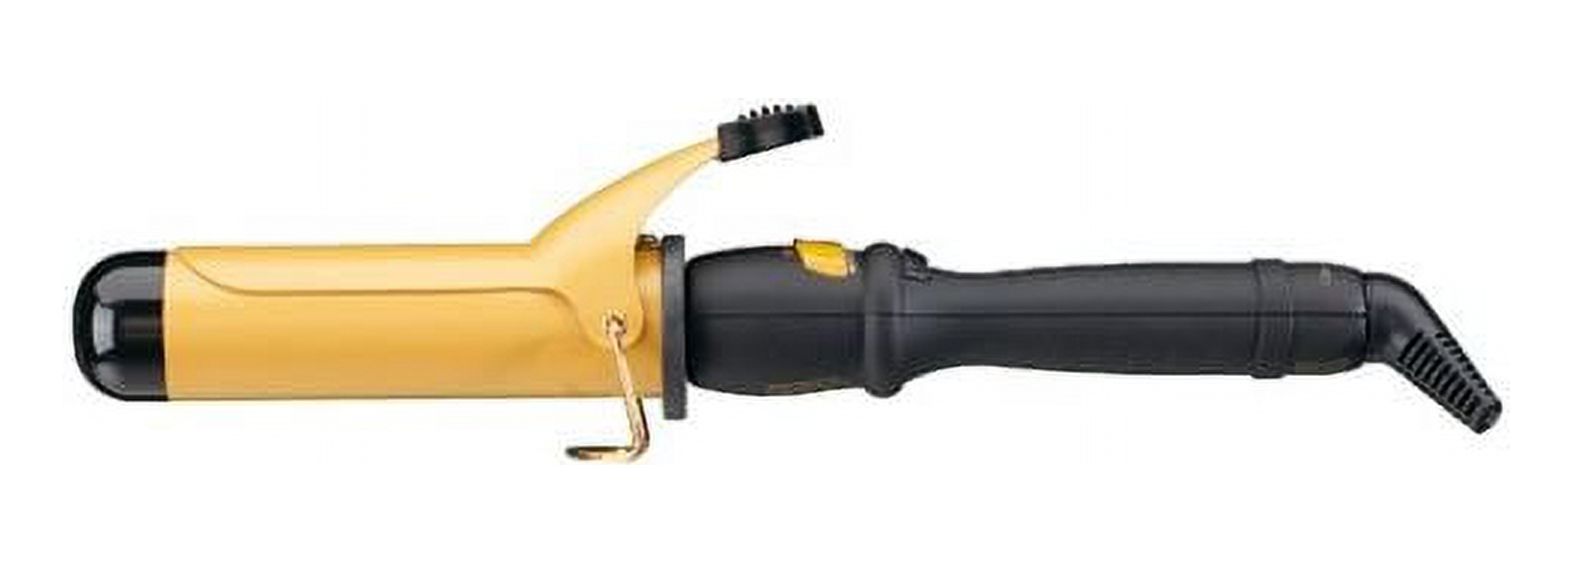 BaBylissPRO Ceramic Tools Spring Curling Iron, 1.5" - image 1 of 3